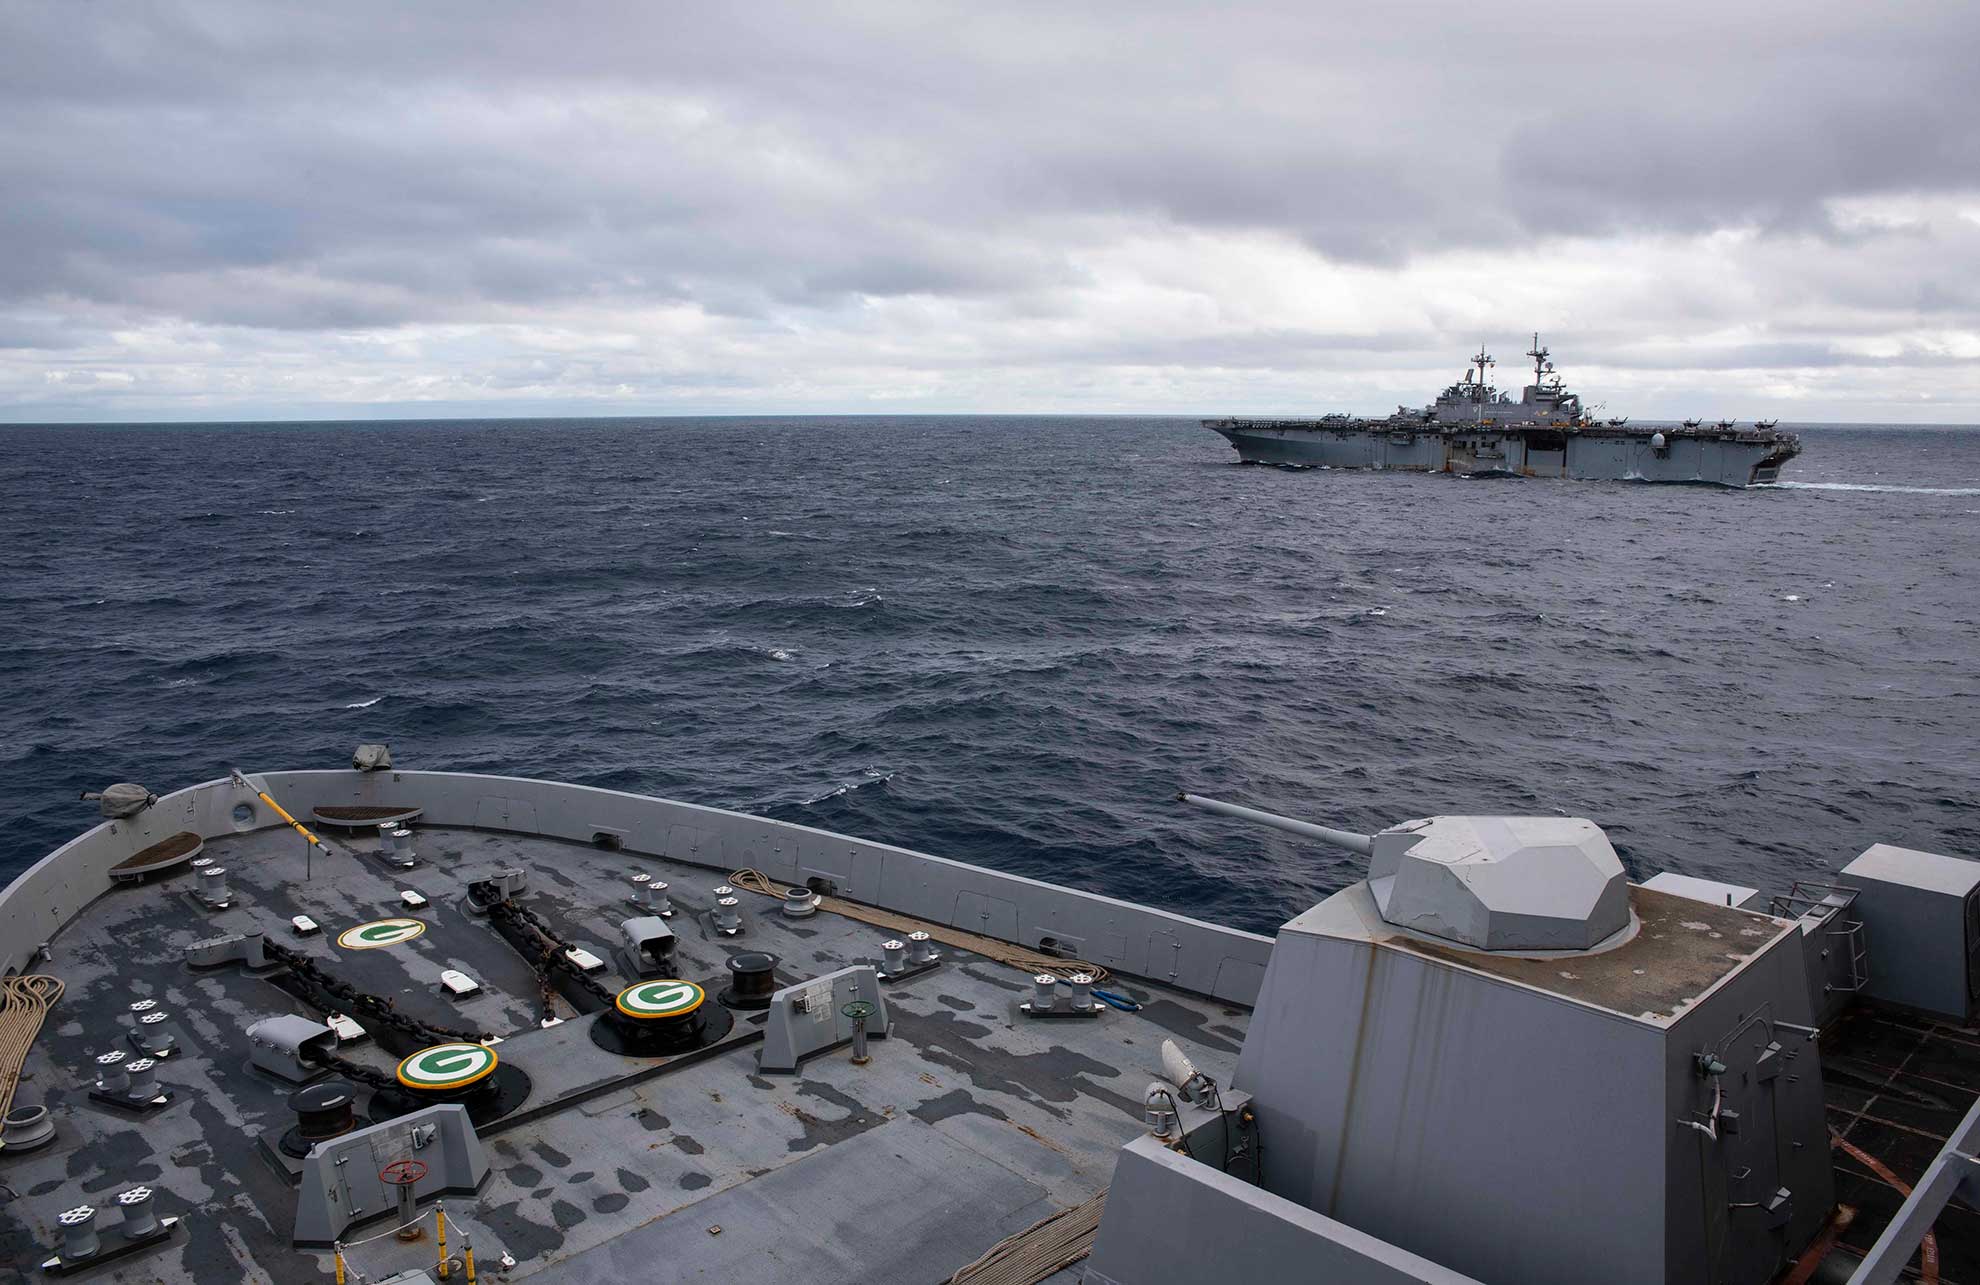 East China sea (Jan. 12, 2019) The amphibious assault ship USS Wasp (LHD 1) transits the East China Sea with the amphibious transport dock ship USS Green Bay (LPD 20), foreground, during a cooperative deployment with the Japan Maritime Self-Defense Force amphibious transport dock ship JS Kunisaki (LST 4003), not pictured. The amphibious transport dock ship USS Green Bay (LPD 20), part of the Wasp Amphibious Ready Group, is operating in the region to enhance interoperability with partners and serve as a ready-response force for any type of contingency -- U.S. Navy photo by MCS Anaid Banuelos Rodriguez. -